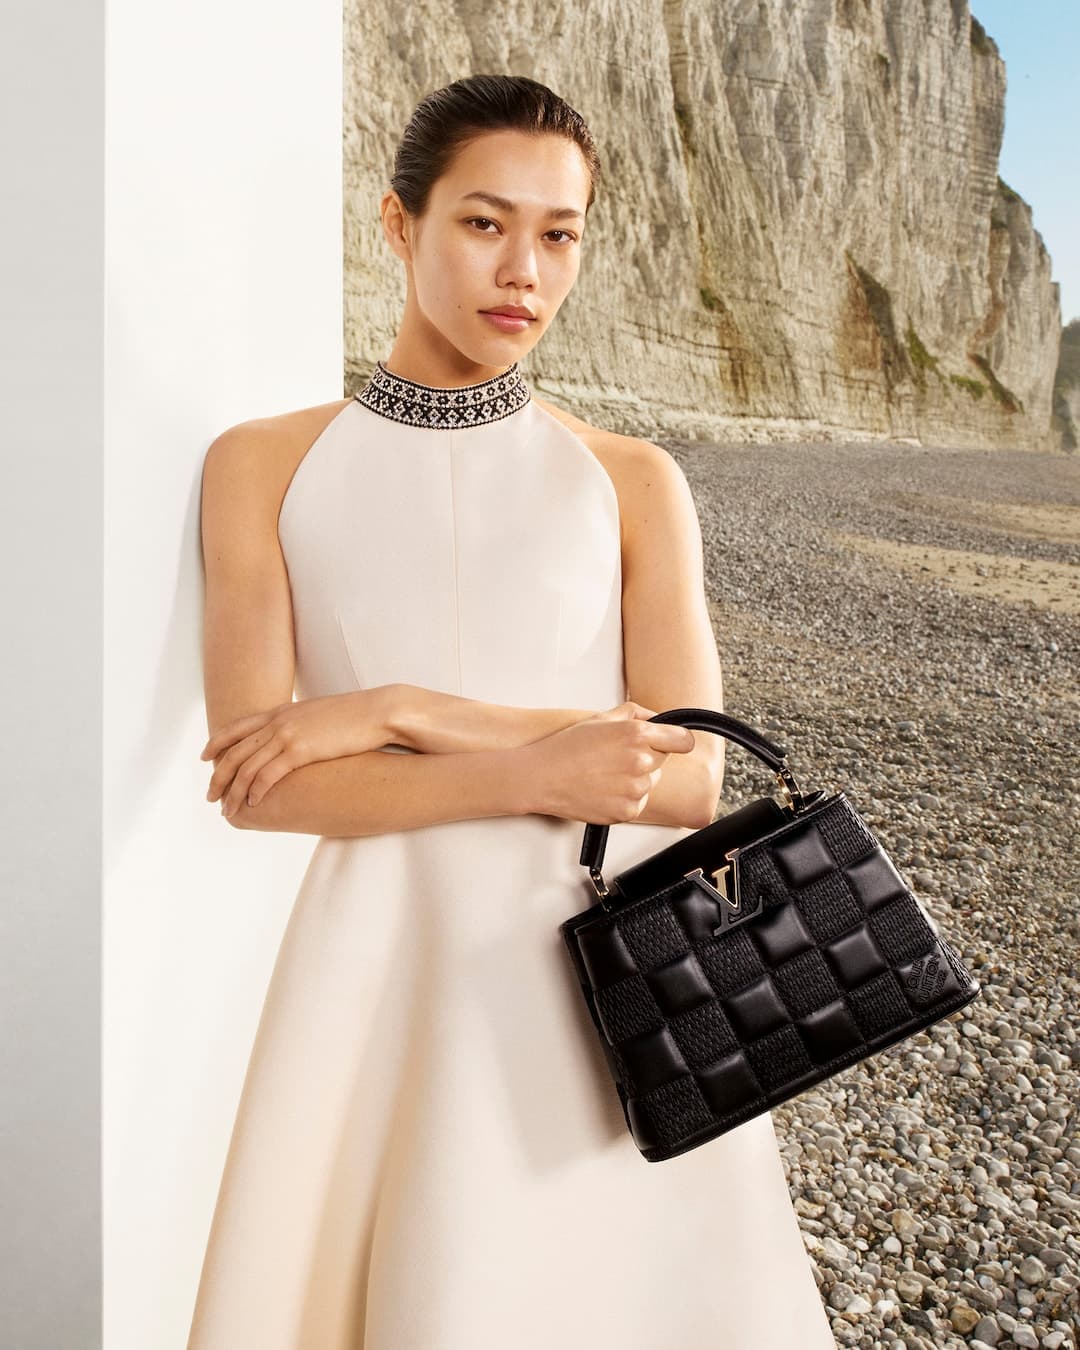 Louis Vuitton 'hand-made' campaign falls foul of ASA